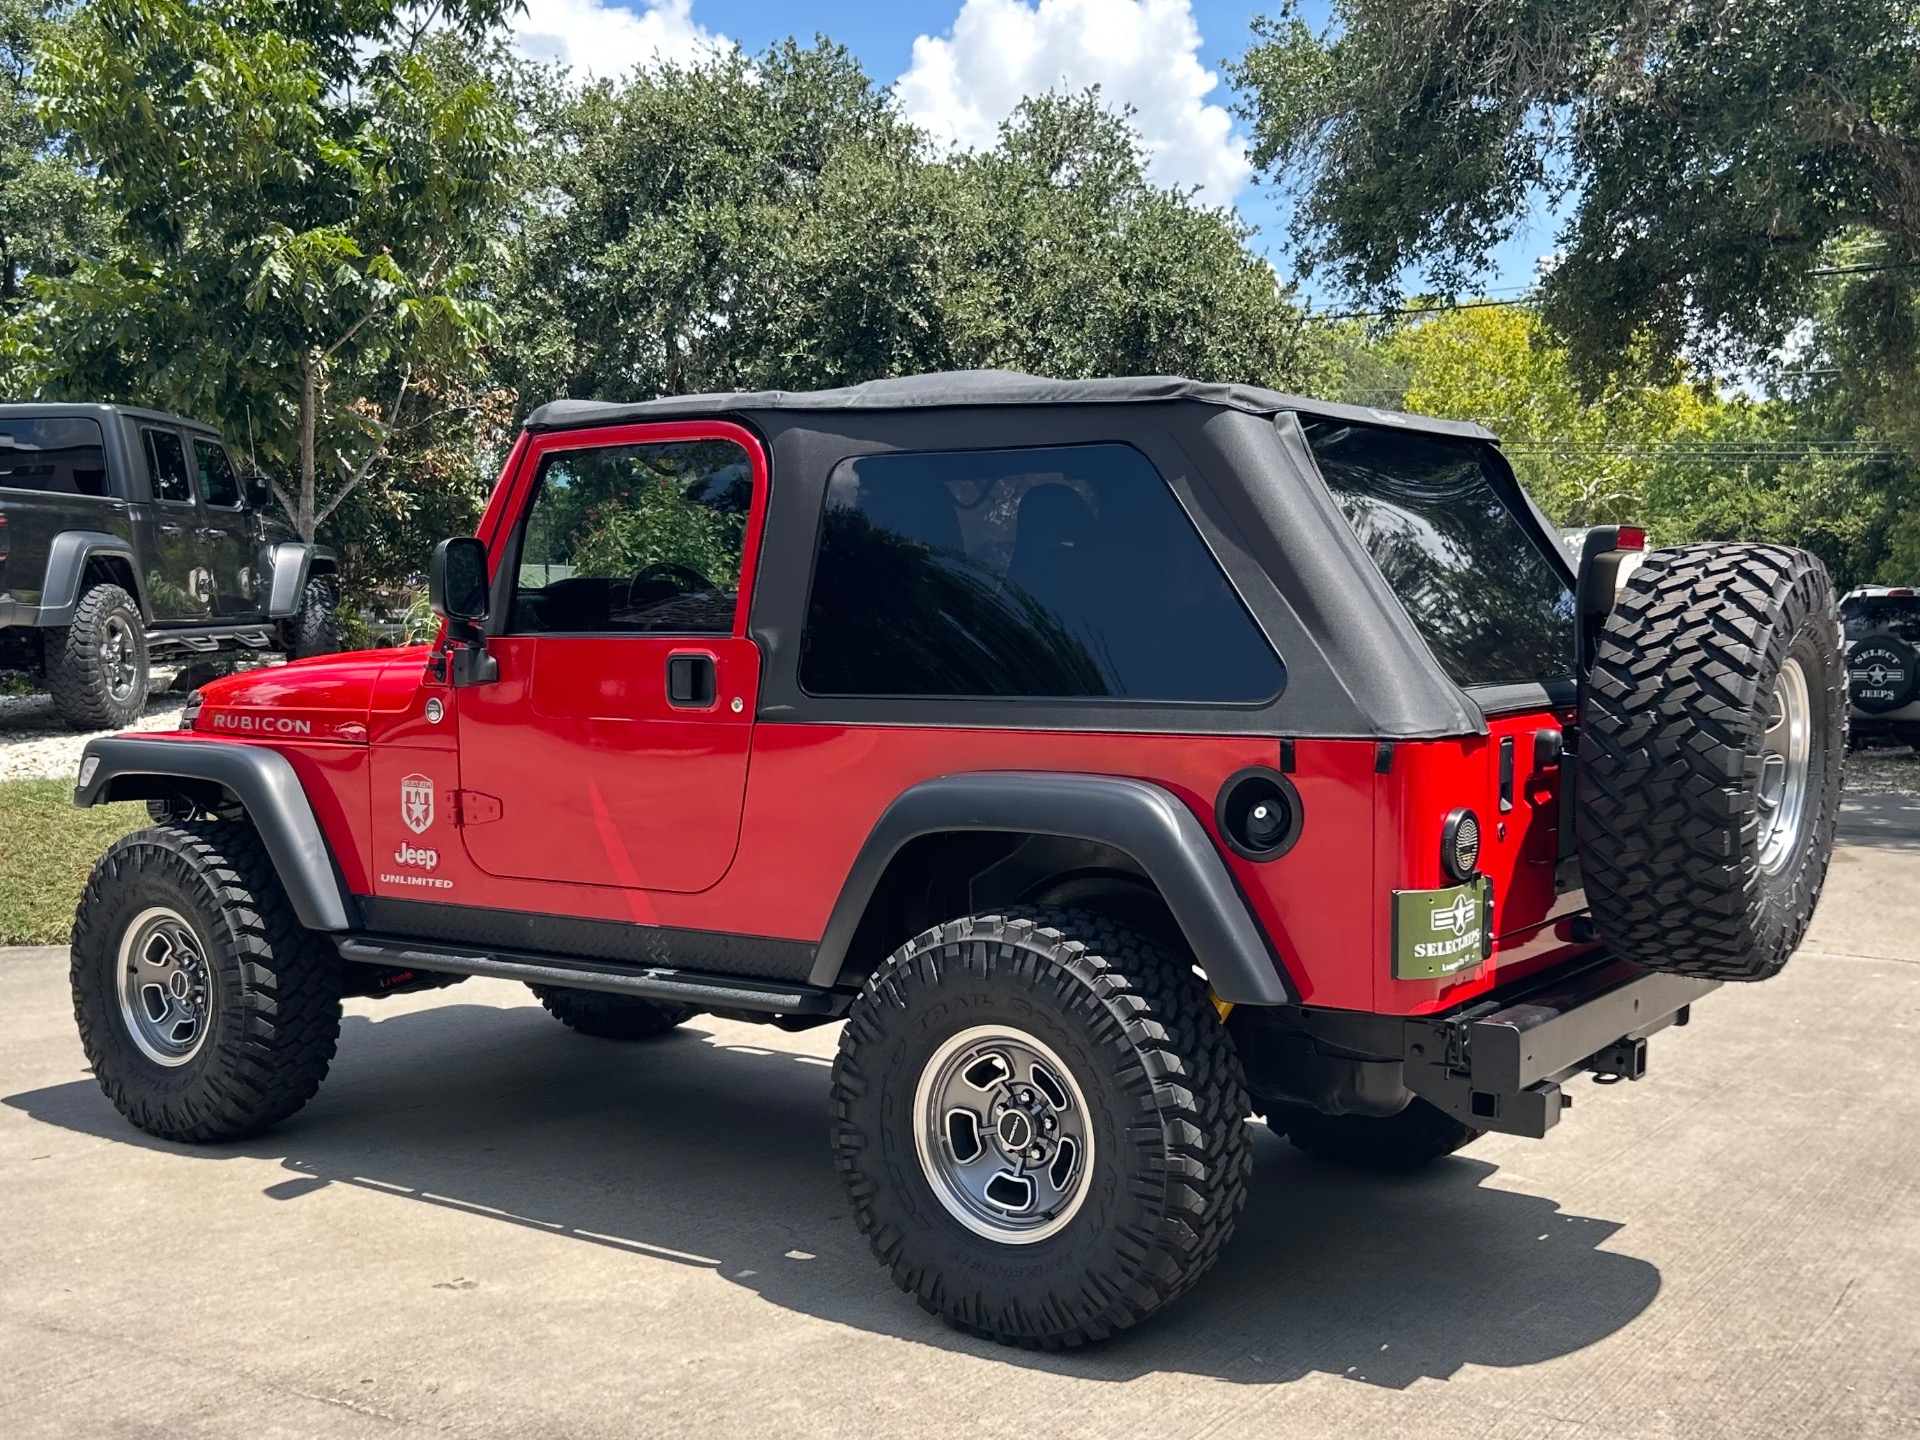 Used-2005-Jeep-Wrangler-Unlimited-Rubicon